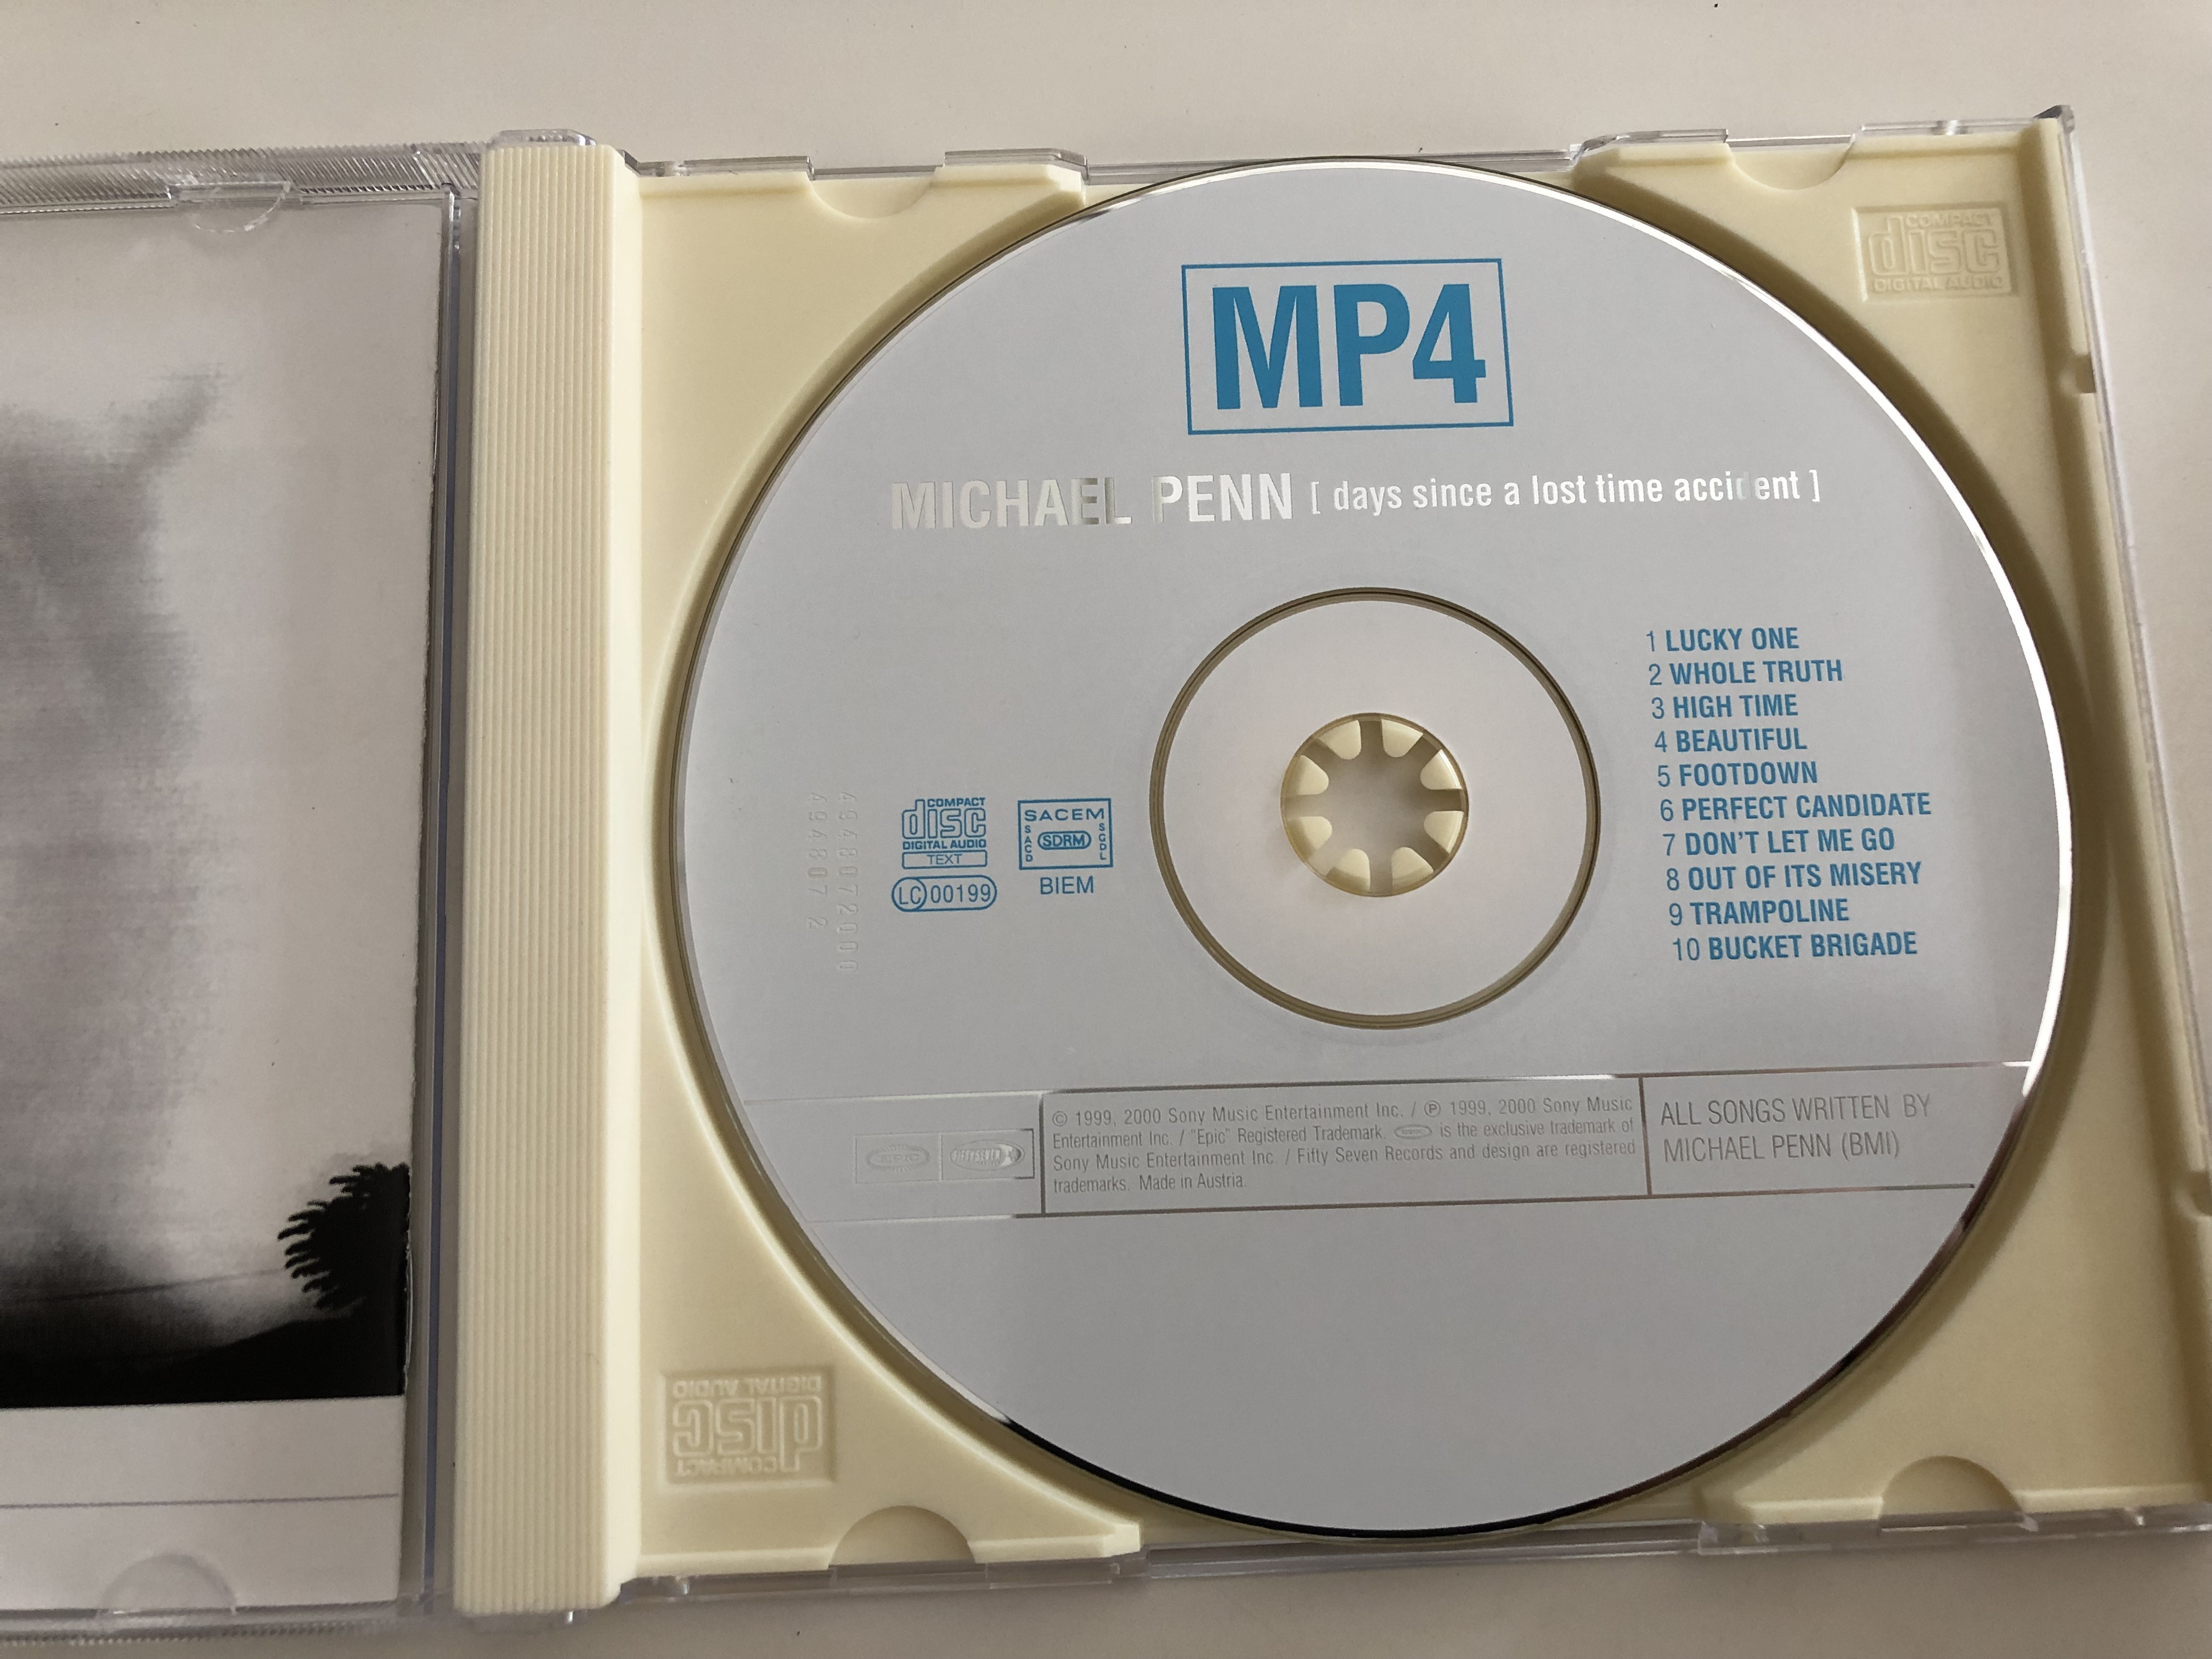 michael-penn-days-since-a-lost-time-accident-audio-cd-2000-mp4-epic-records-epc-4948072-5-.jpg